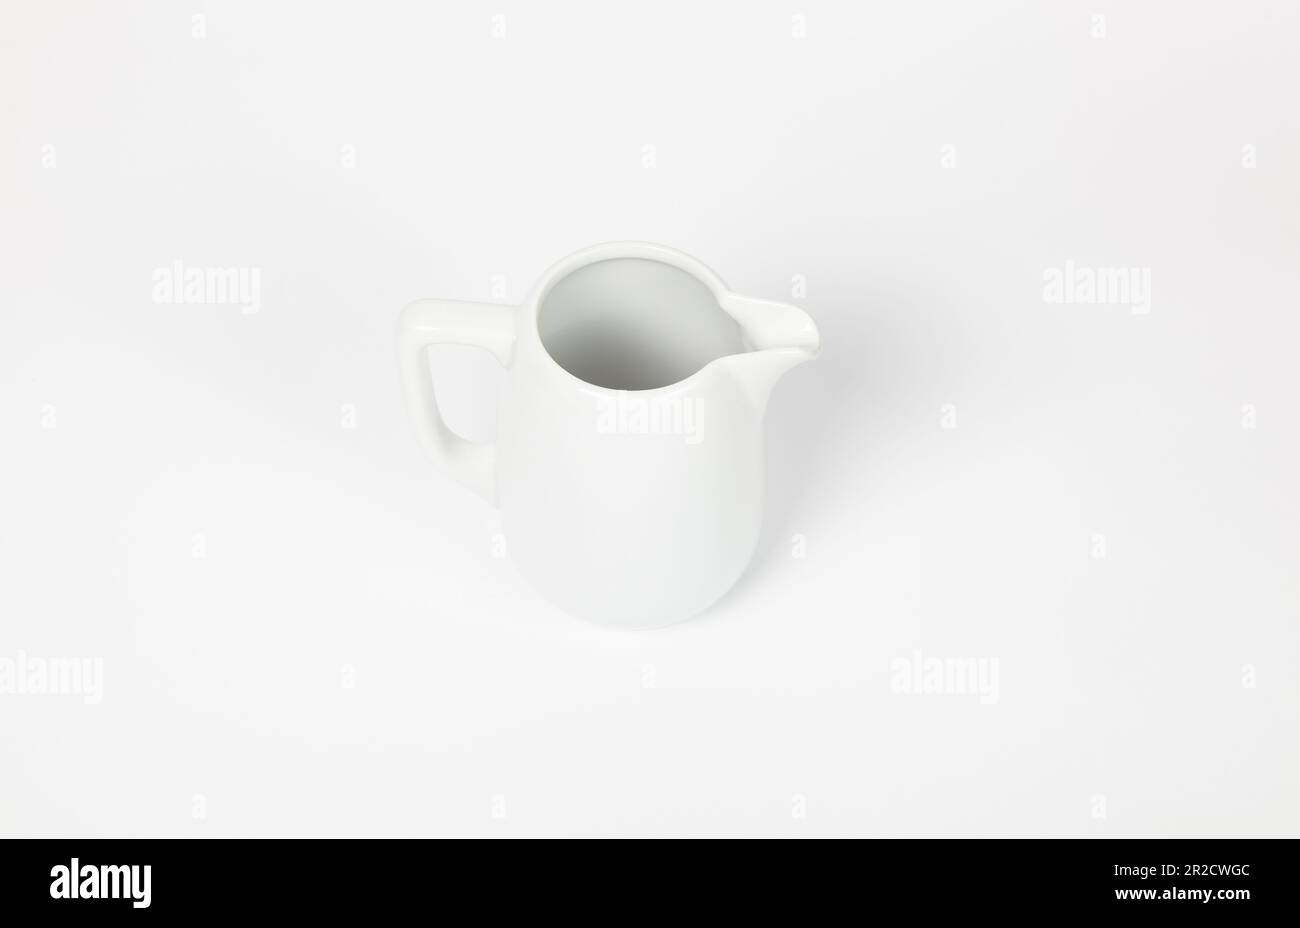 https://c8.alamy.com/comp/2R2CWGC/milk-jug-on-white-background-porcelain-sauce-boat-pitcher-creamer-or-ceramic-gravy-boat-space-for-text-for-advertising-banner-signboard-menu-a-2R2CWGC.jpg